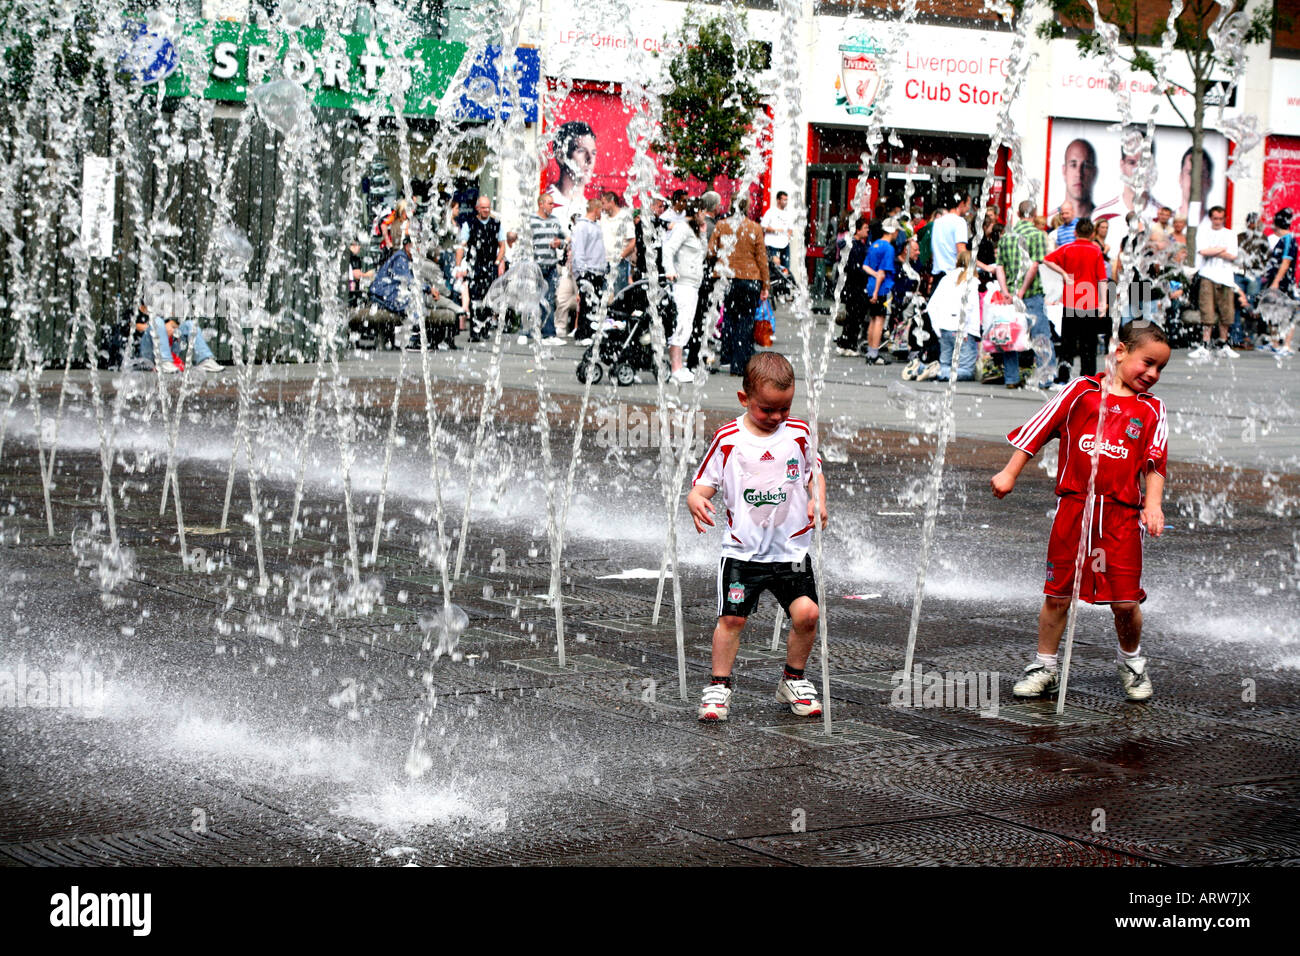 Children in football colours play in fountains in front of Liverpool FC supporters store in Williamson Square Liverpool Stock Photo